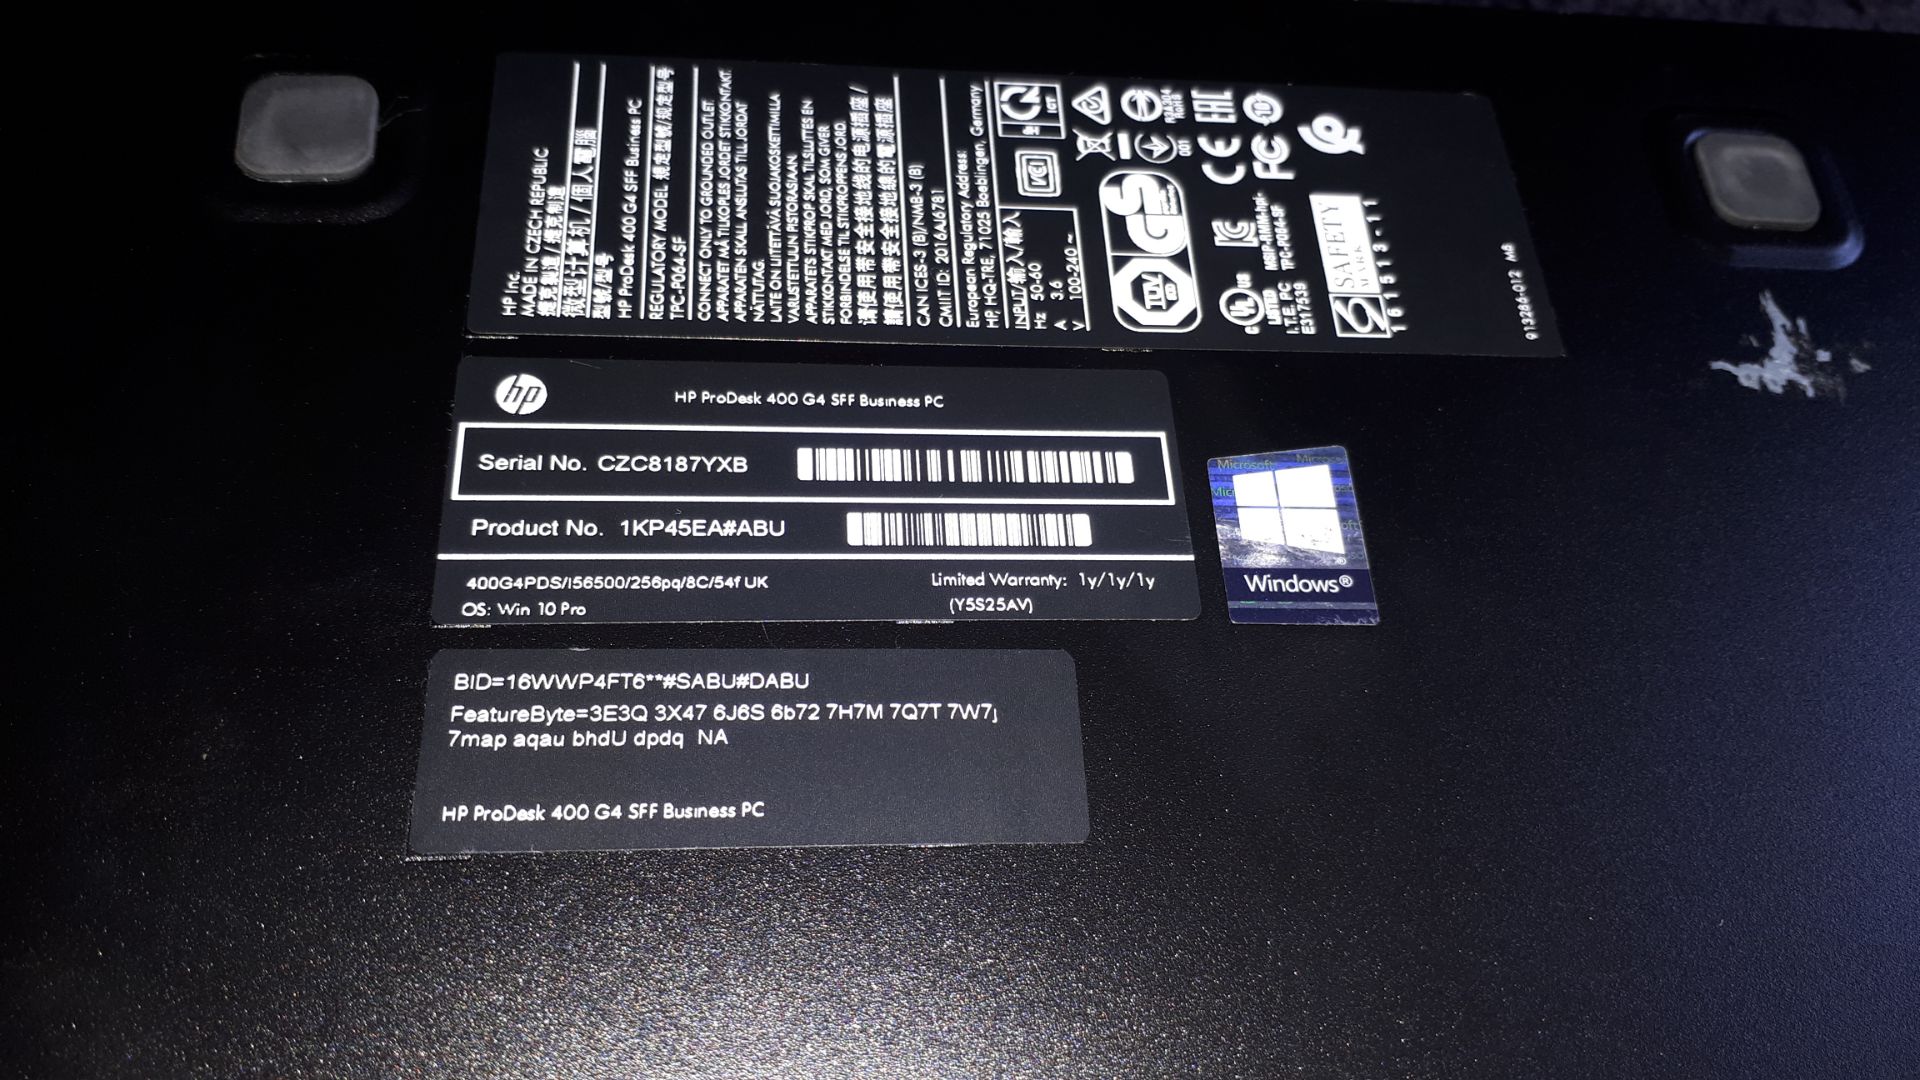 HP ProDesk 400 G4 SFF Business PC, Serial Number C - Image 2 of 3